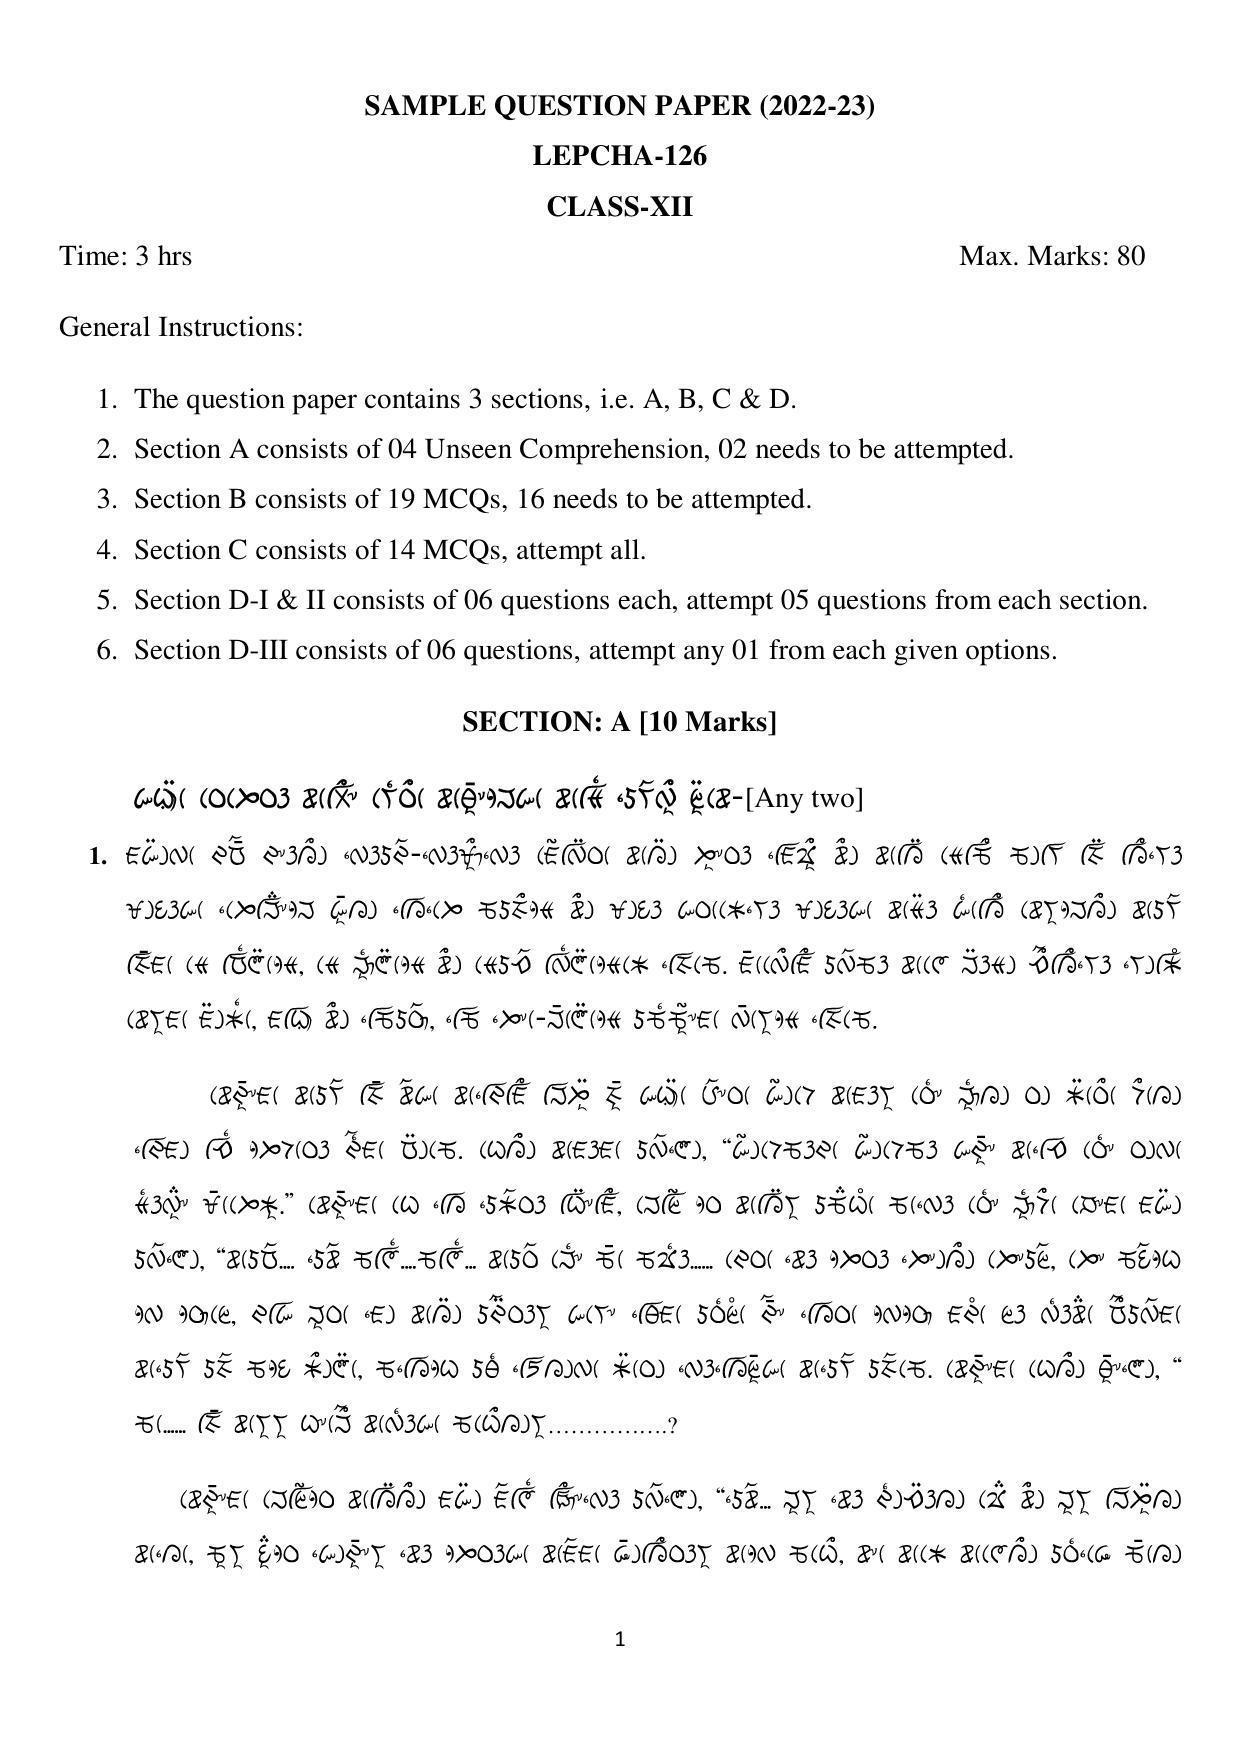 CBSE Class 12 Lepcha Sample Paper 2023 - Page 1